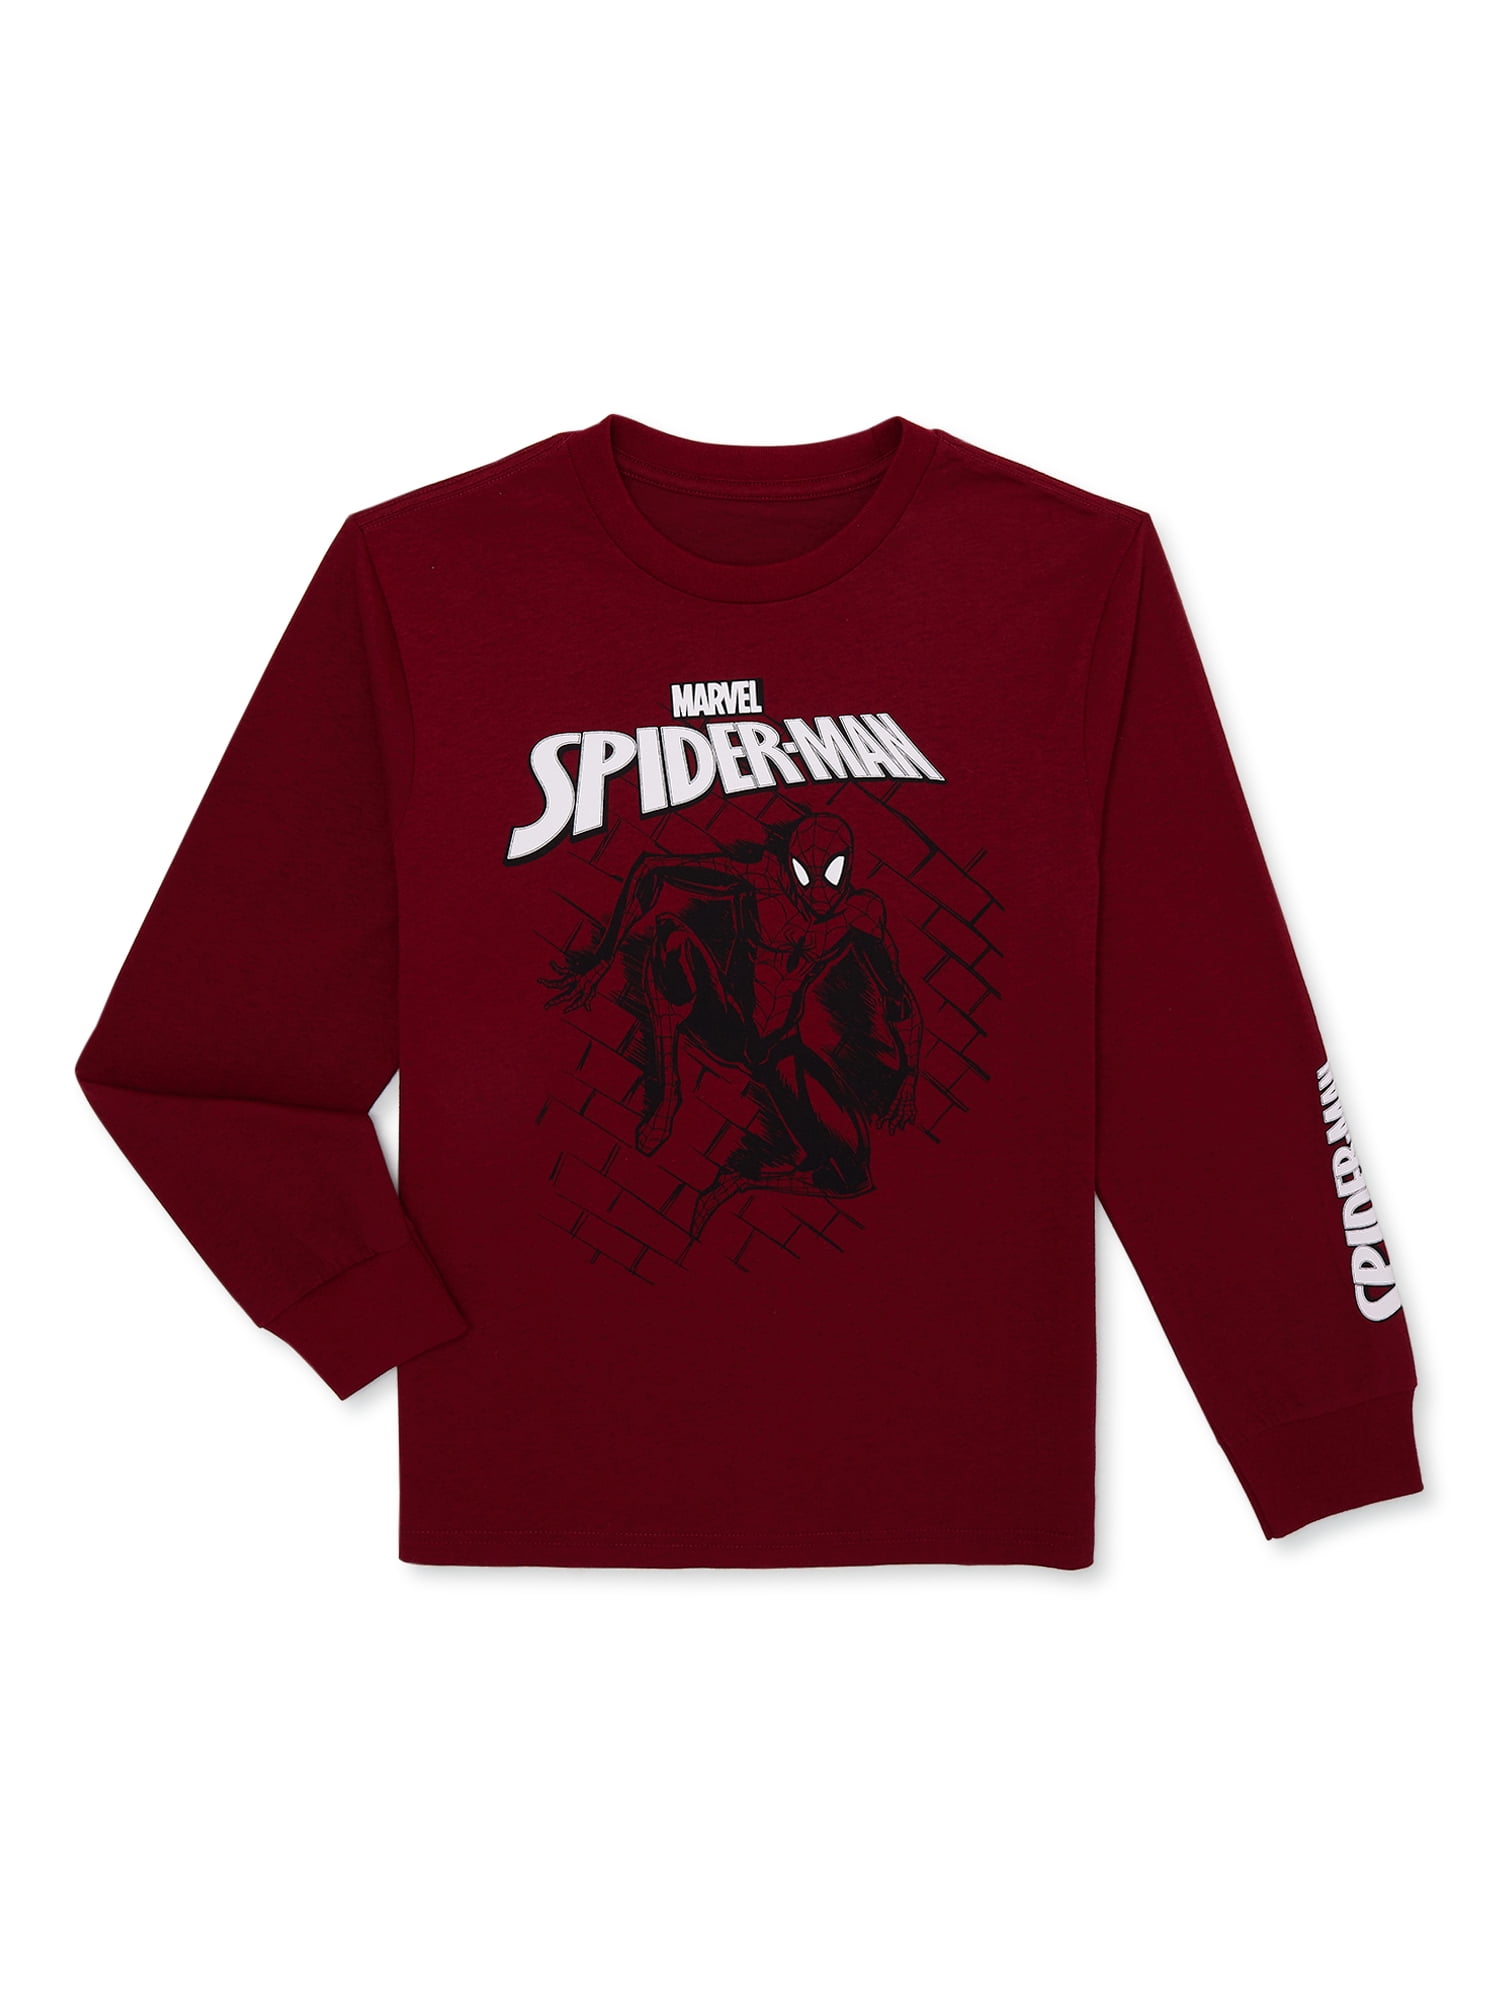 Marvel Spider-Man Boys Long Sleeve Graphic Tee, Sizes 4-18